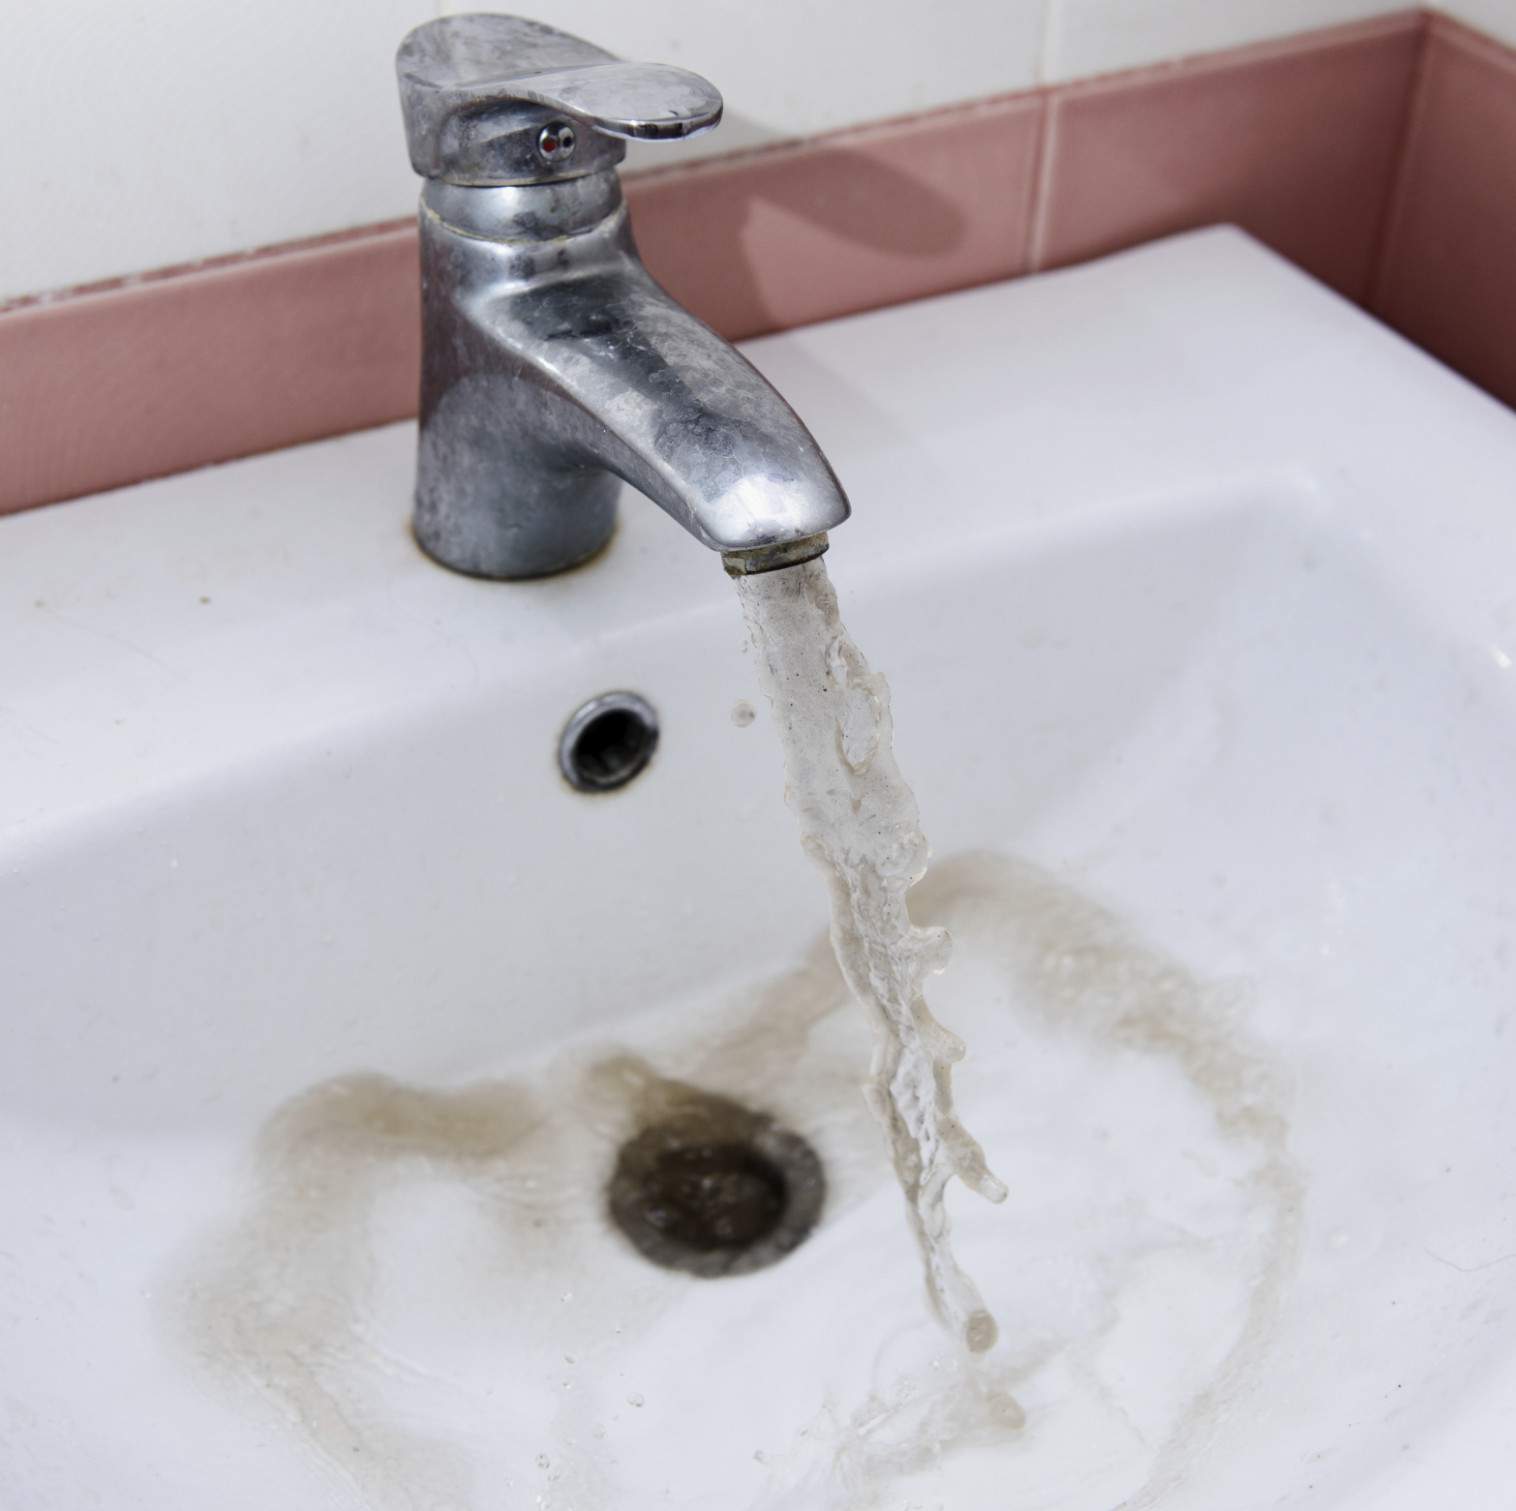 WSSC says discolored water OK to drink, but not for laundry